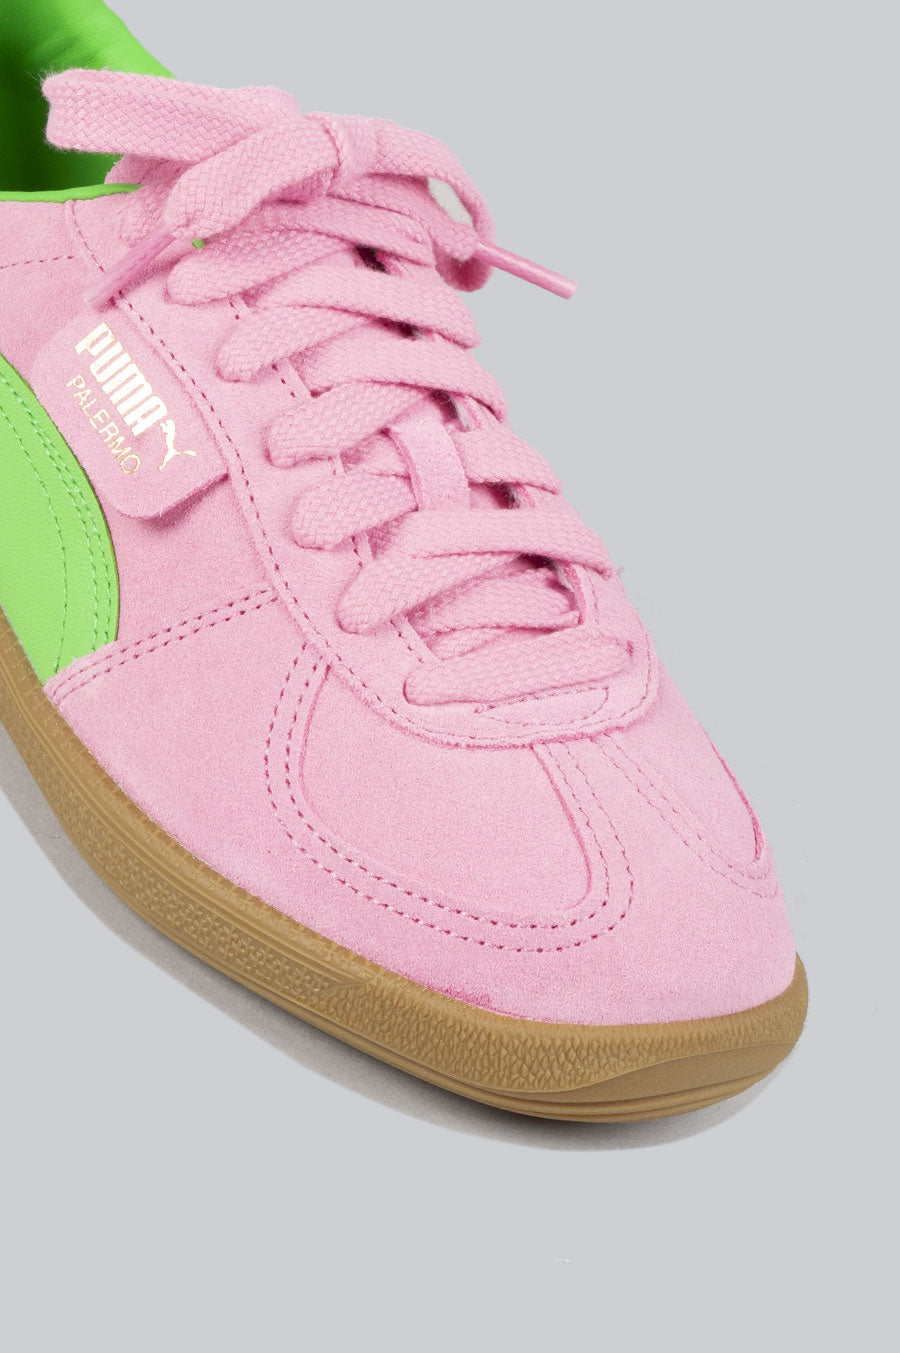 PUMA PALERMO SPECIAL WOMENS PINK DELIGHT